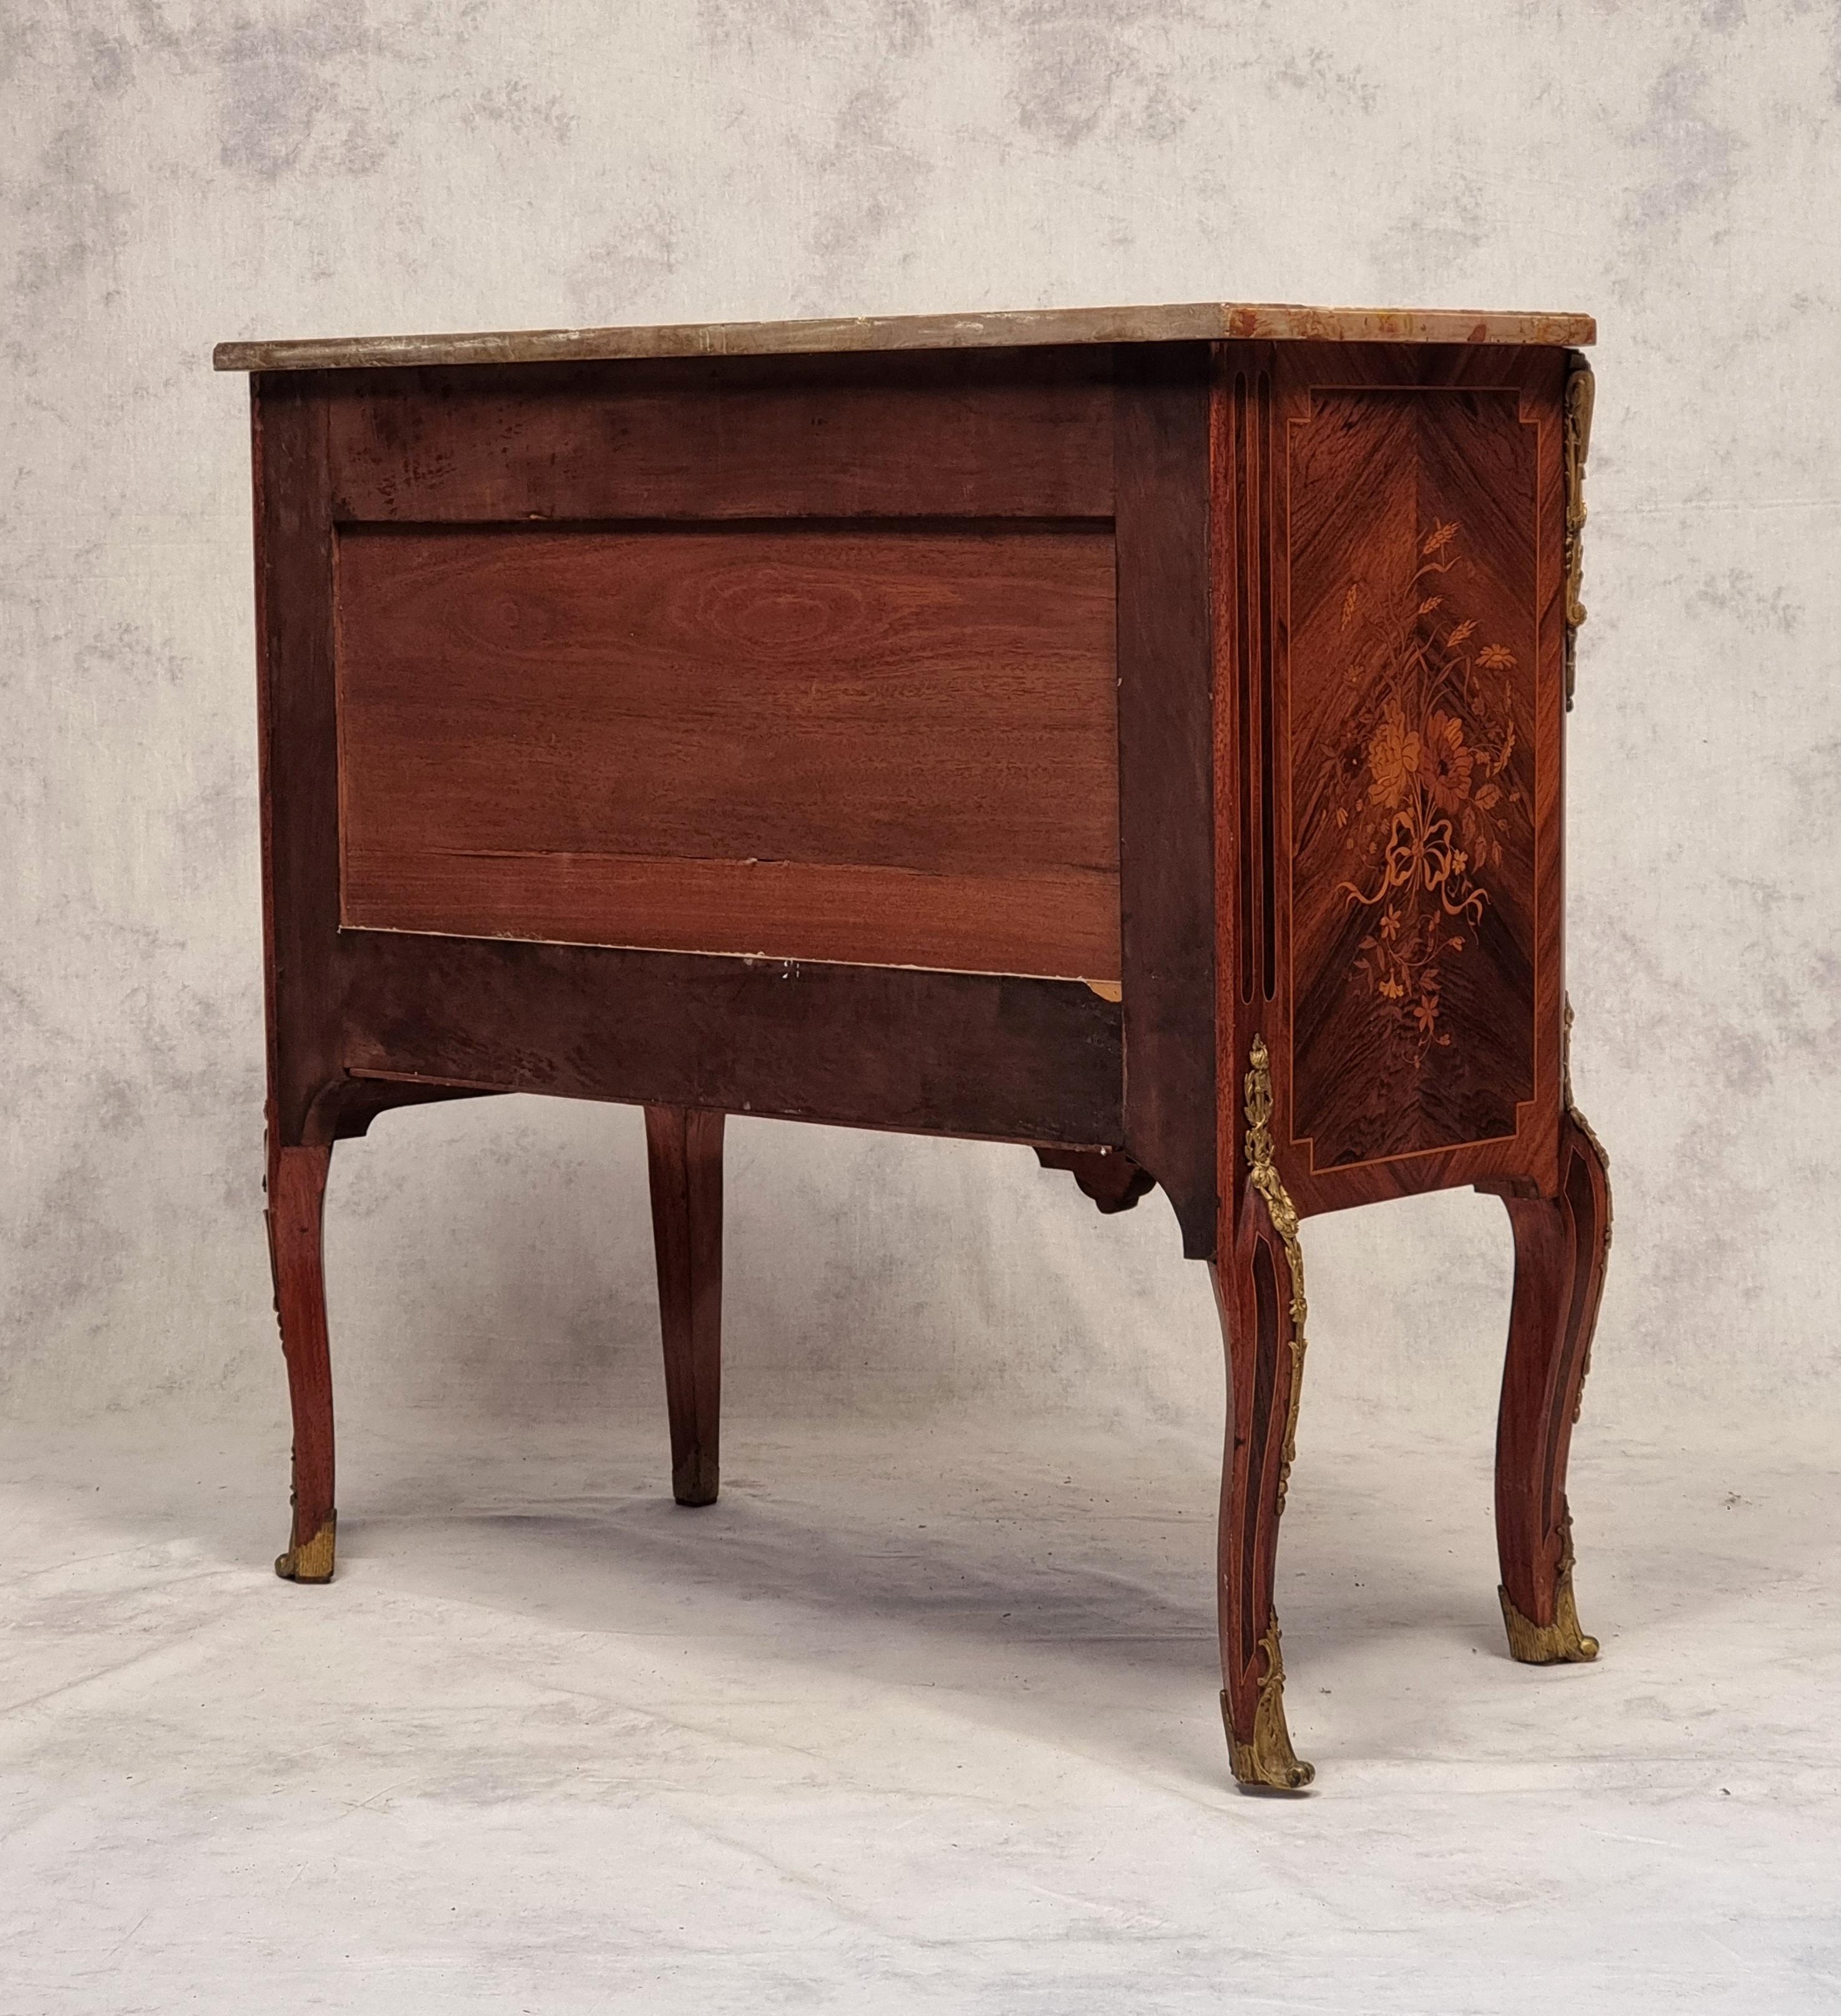 French Transition Style Commode Napoleon III Period - Floral Marquetry - Rosewood - 19t